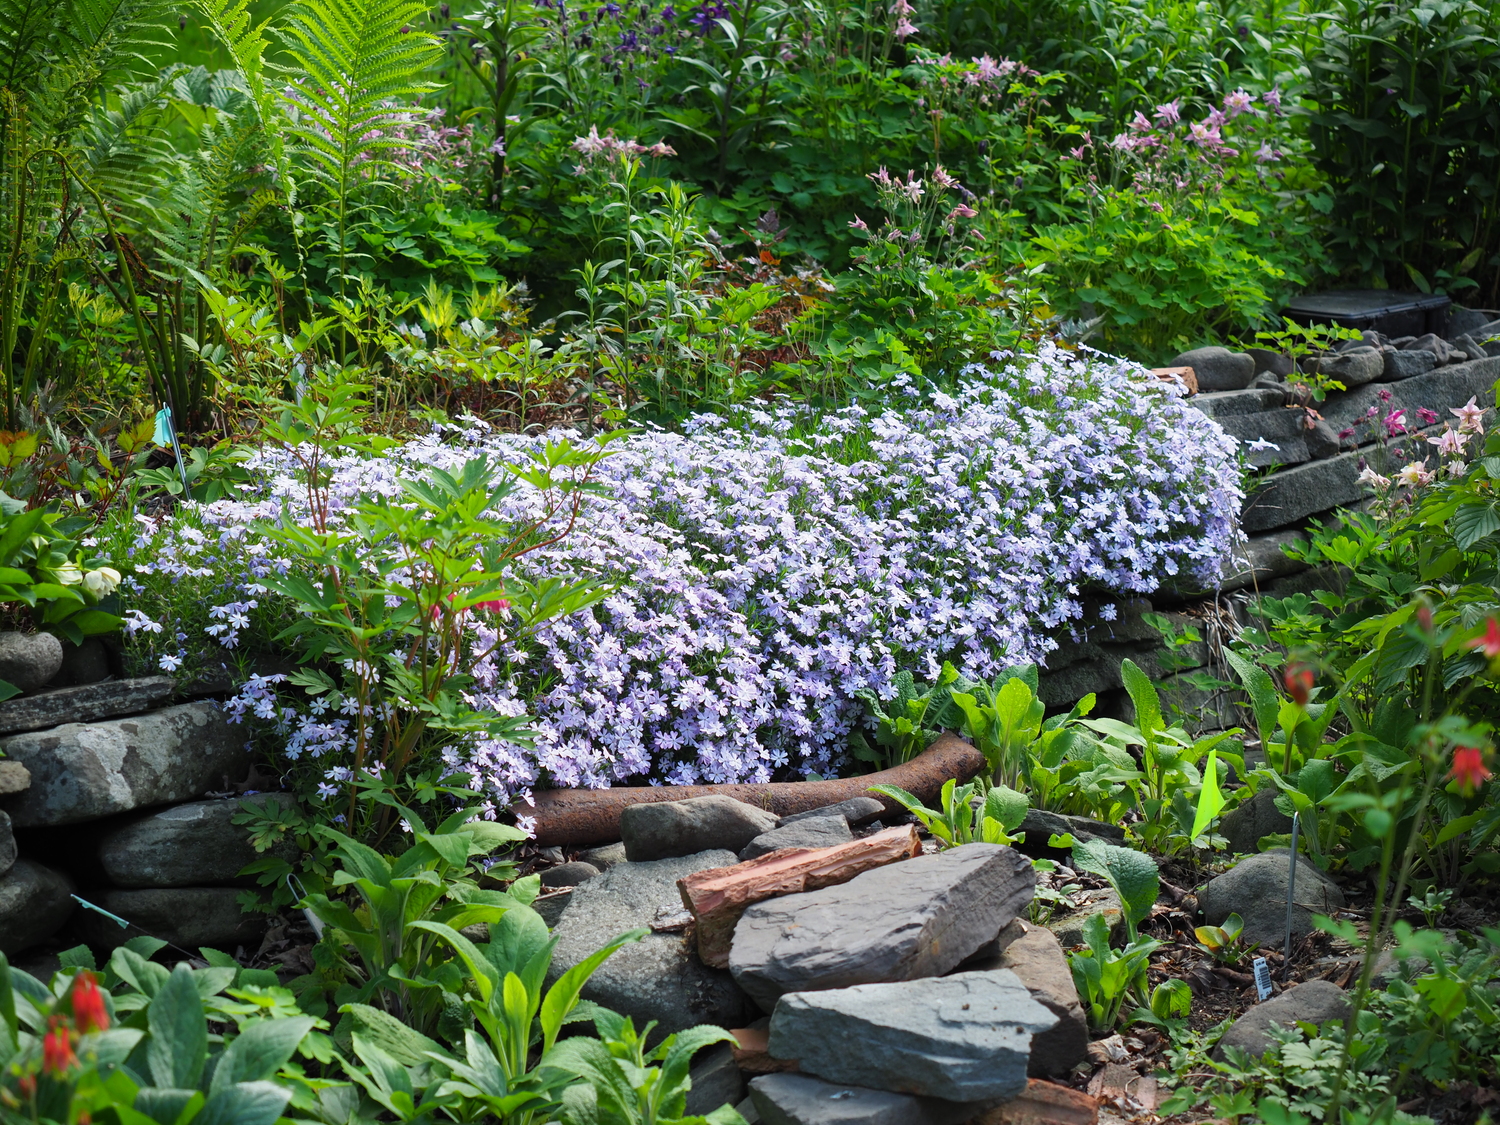 Phlox subulata atop a stone wall and hanging down. These need to be pruned after flowering for a great show the next year. ANDREW MESSINGER